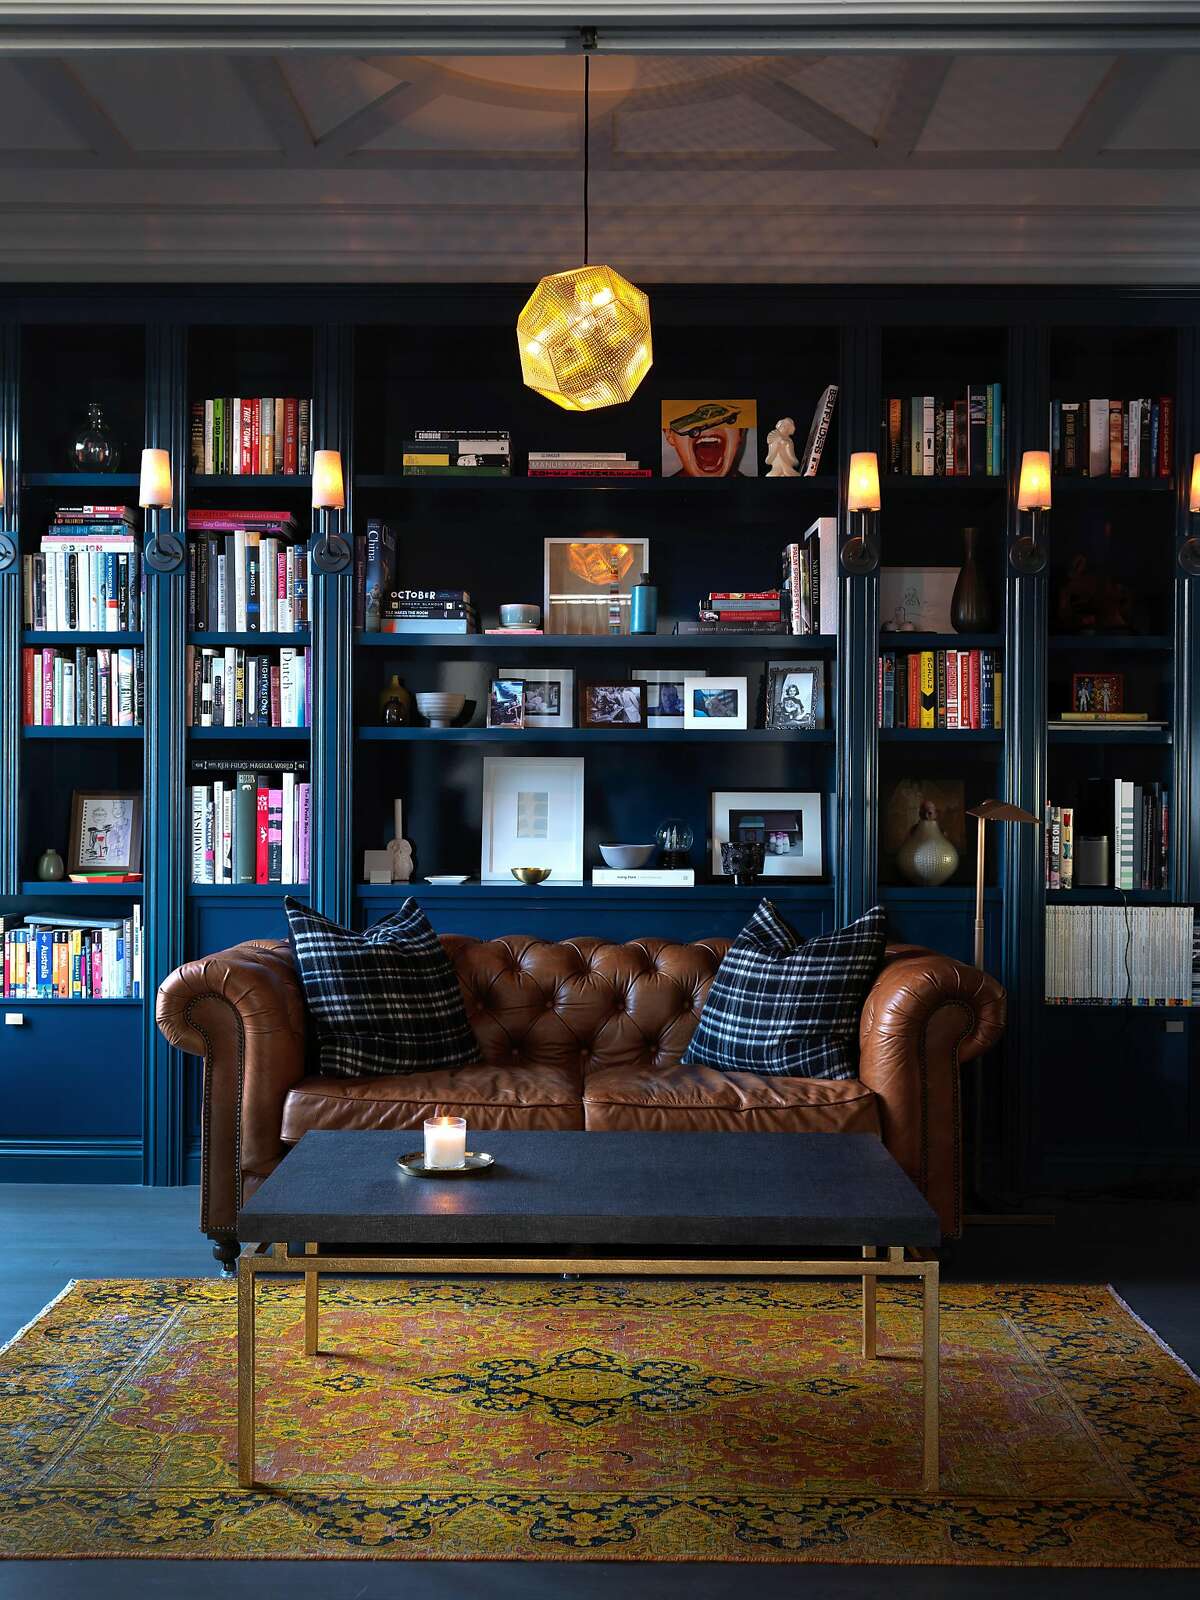 The library of a prewar apartment in Lower Nob Hill, owned by Daniel Maimin and Mark Savery, designed by Karen Curtiss of San Francisco�based Red Dot Studio.